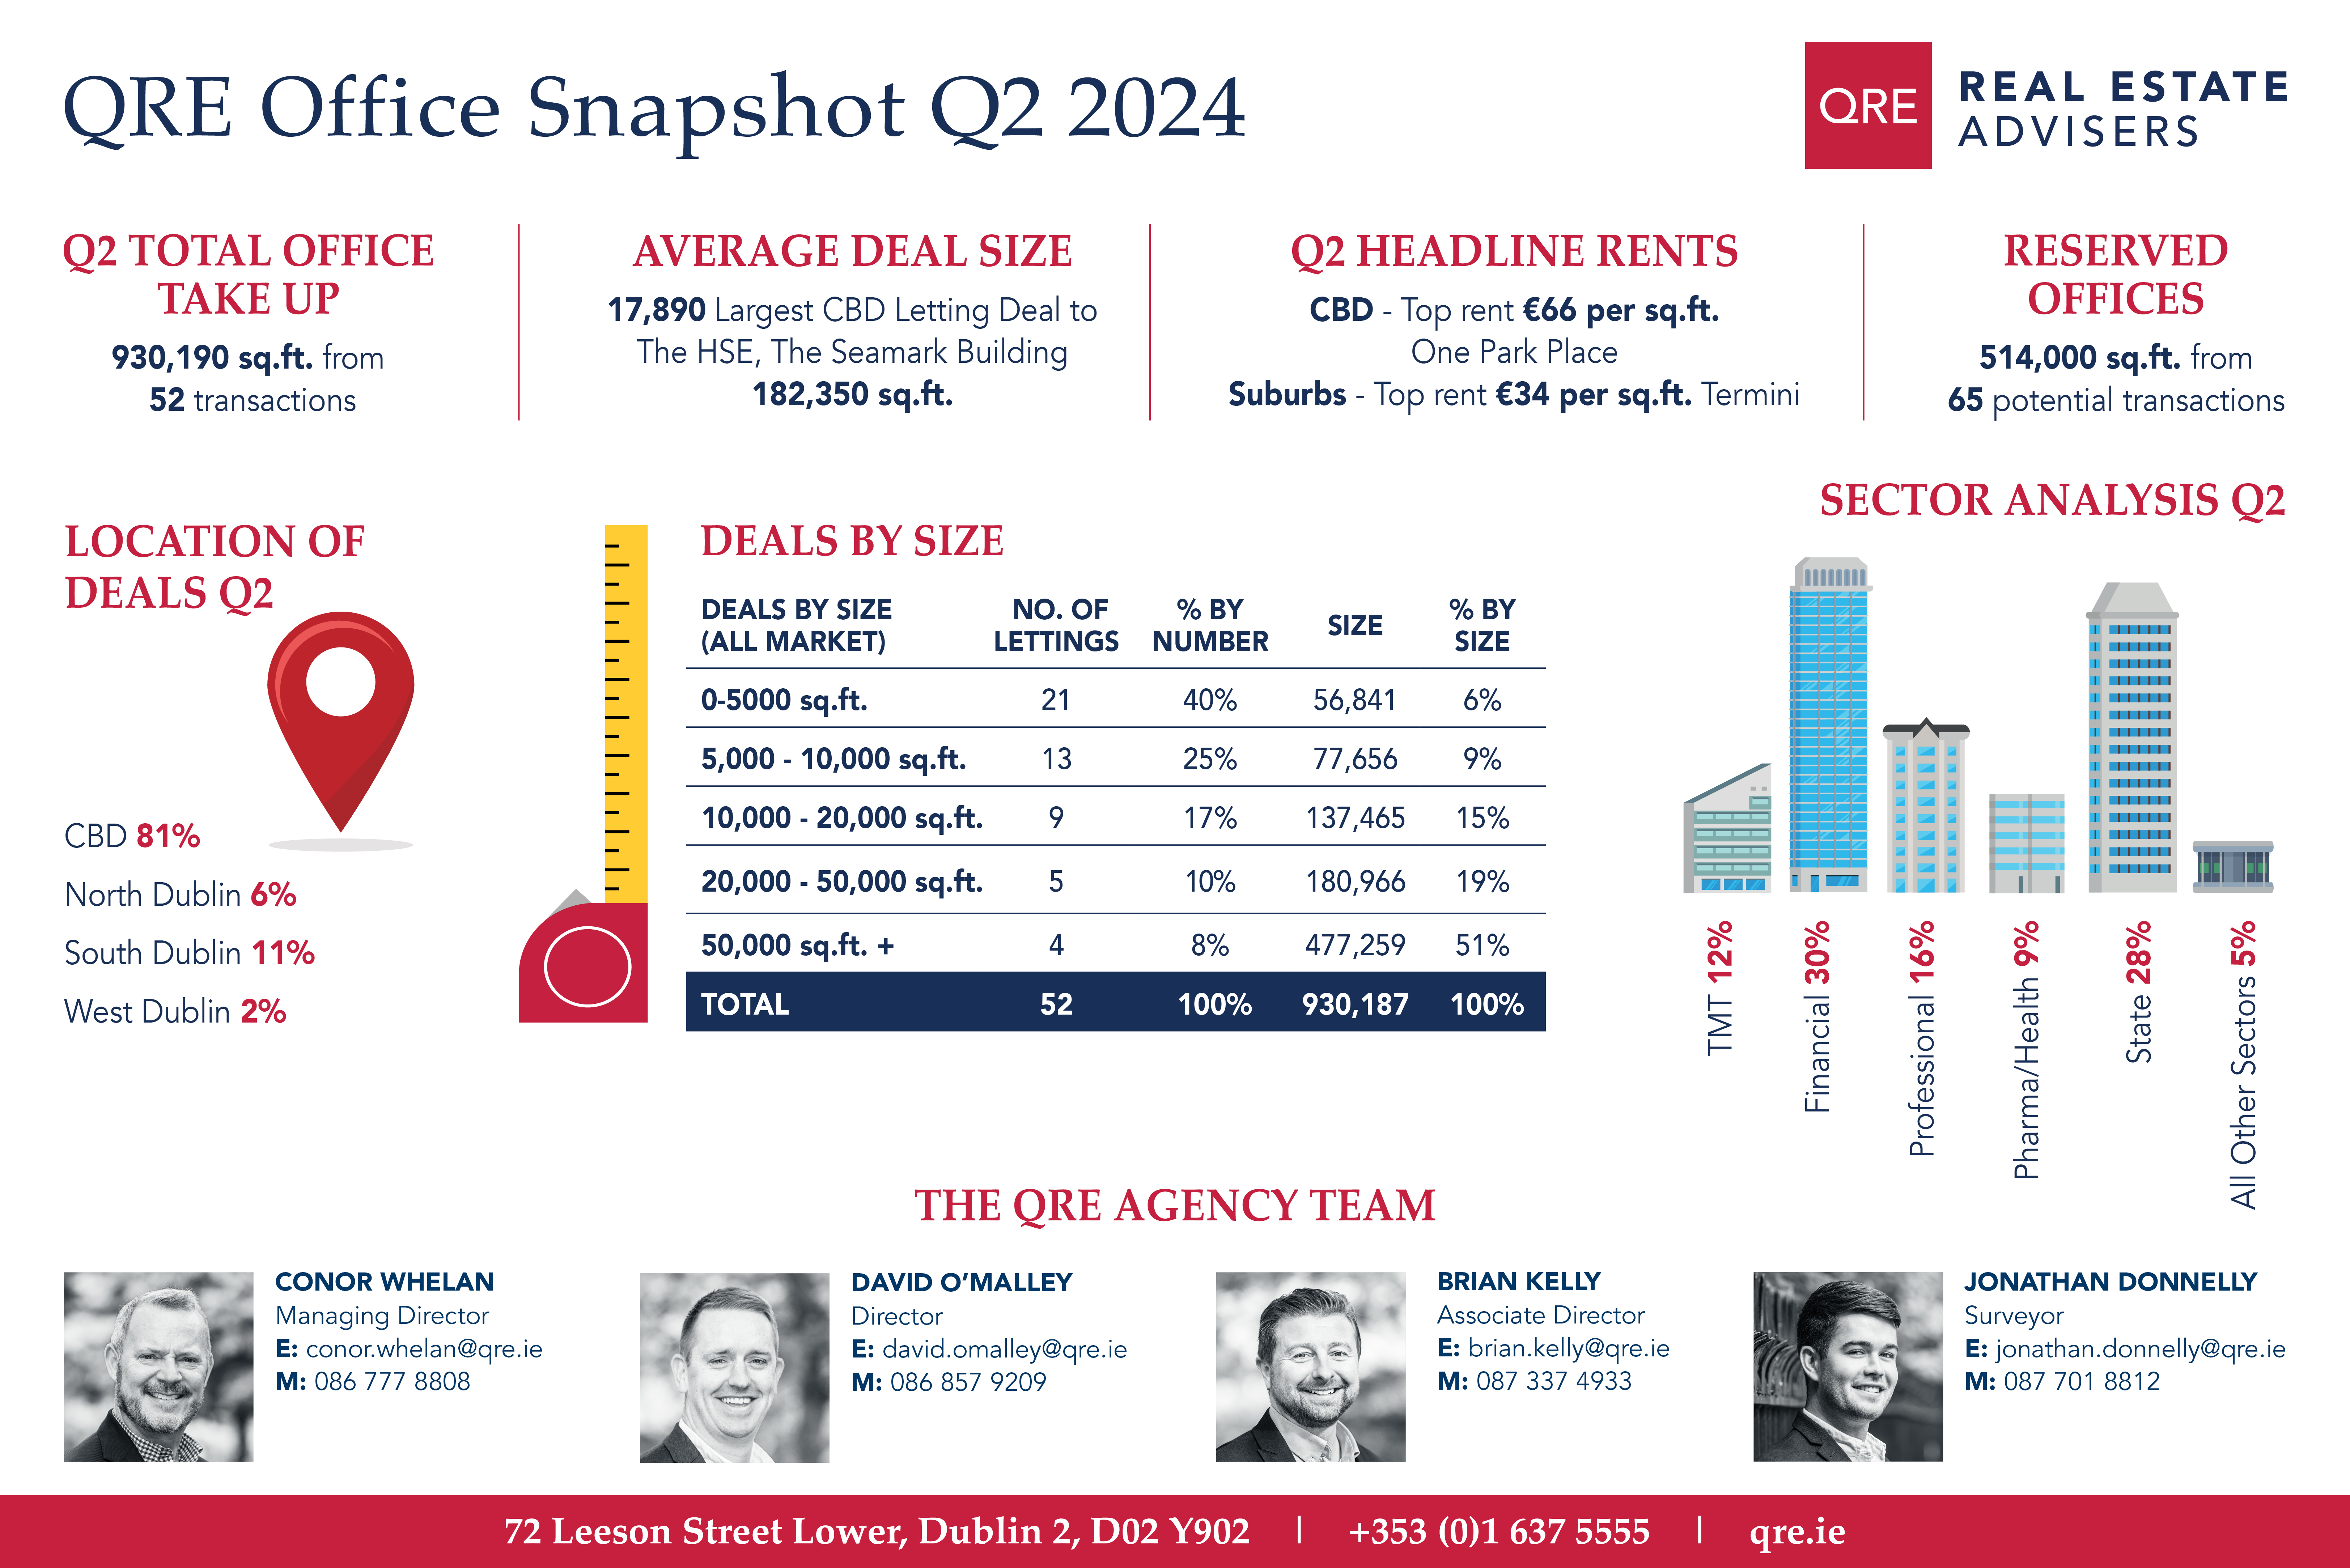 QRE Office Snapshot 2024